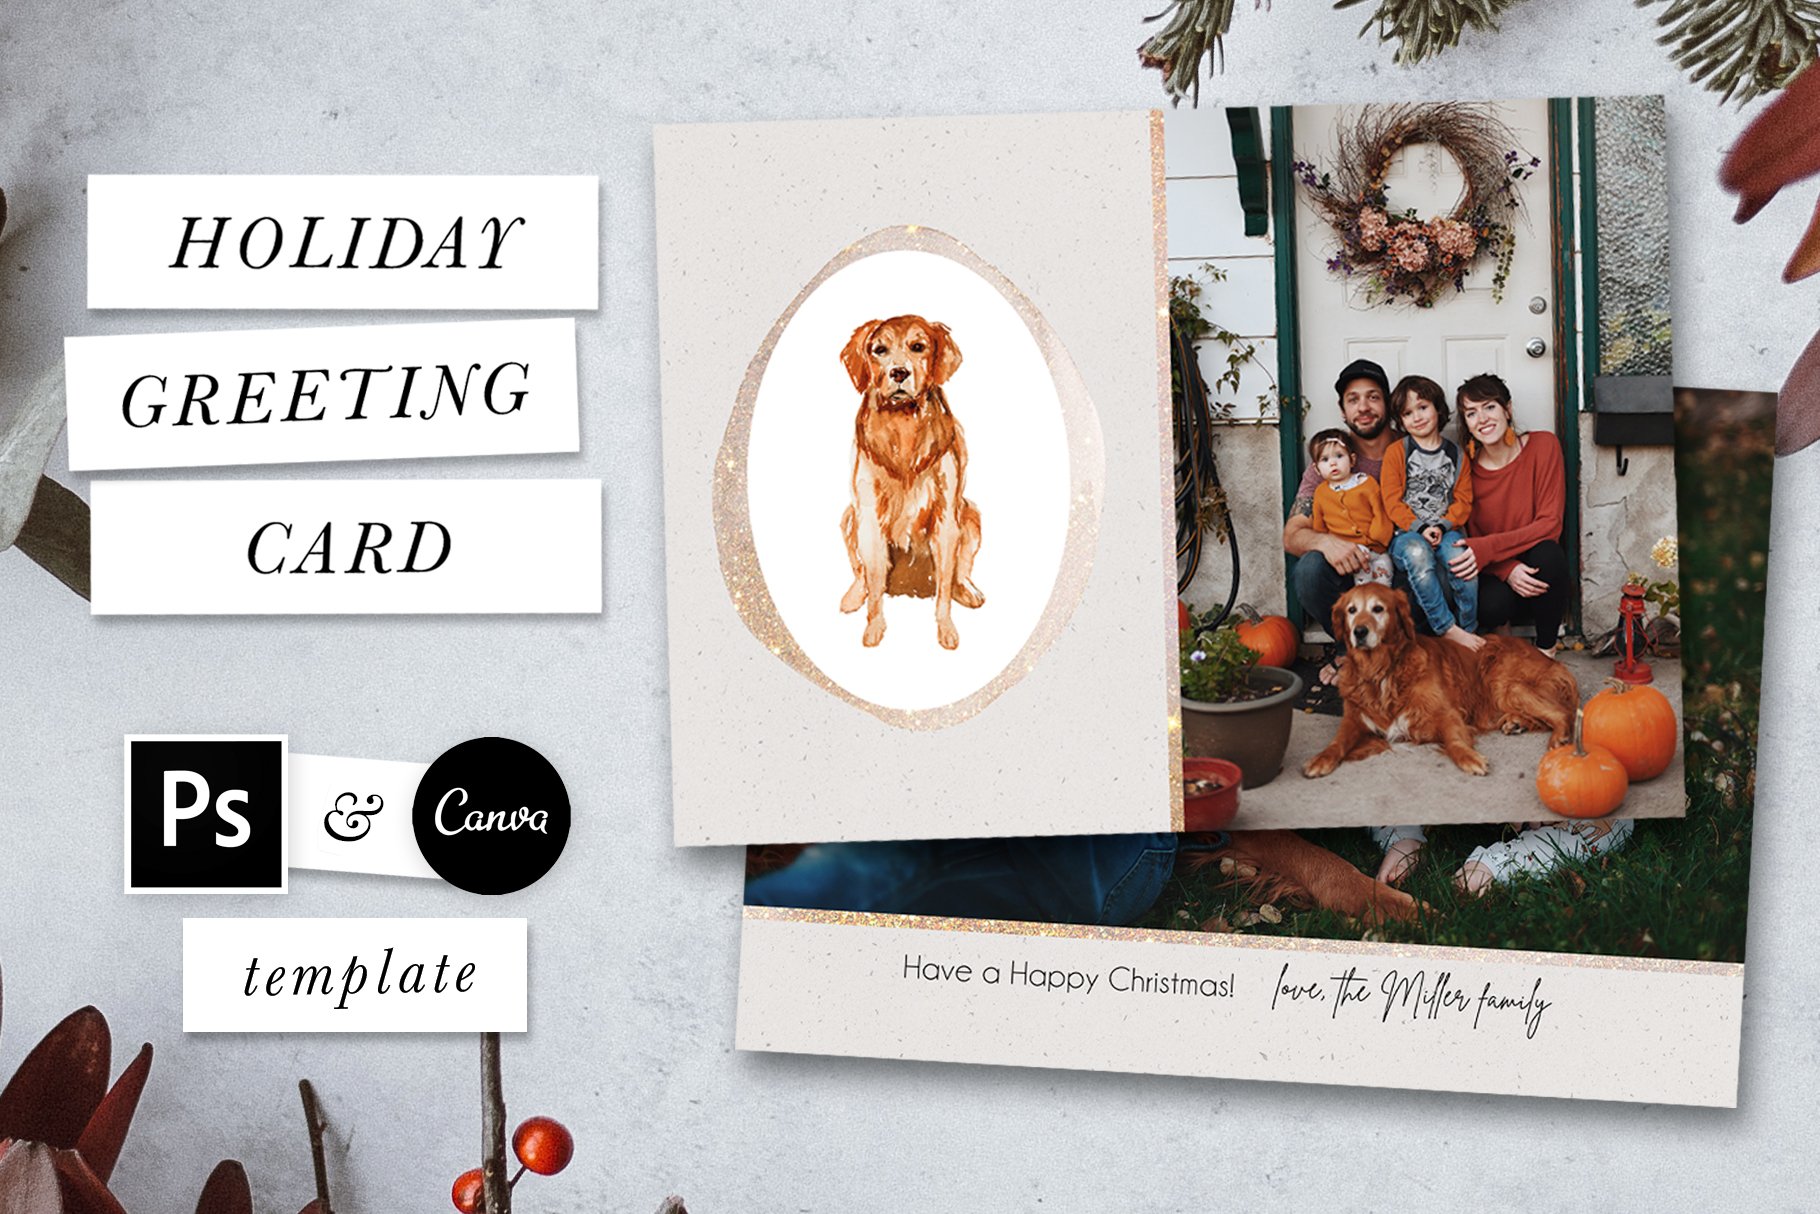 Holiday greeting card with the dog.